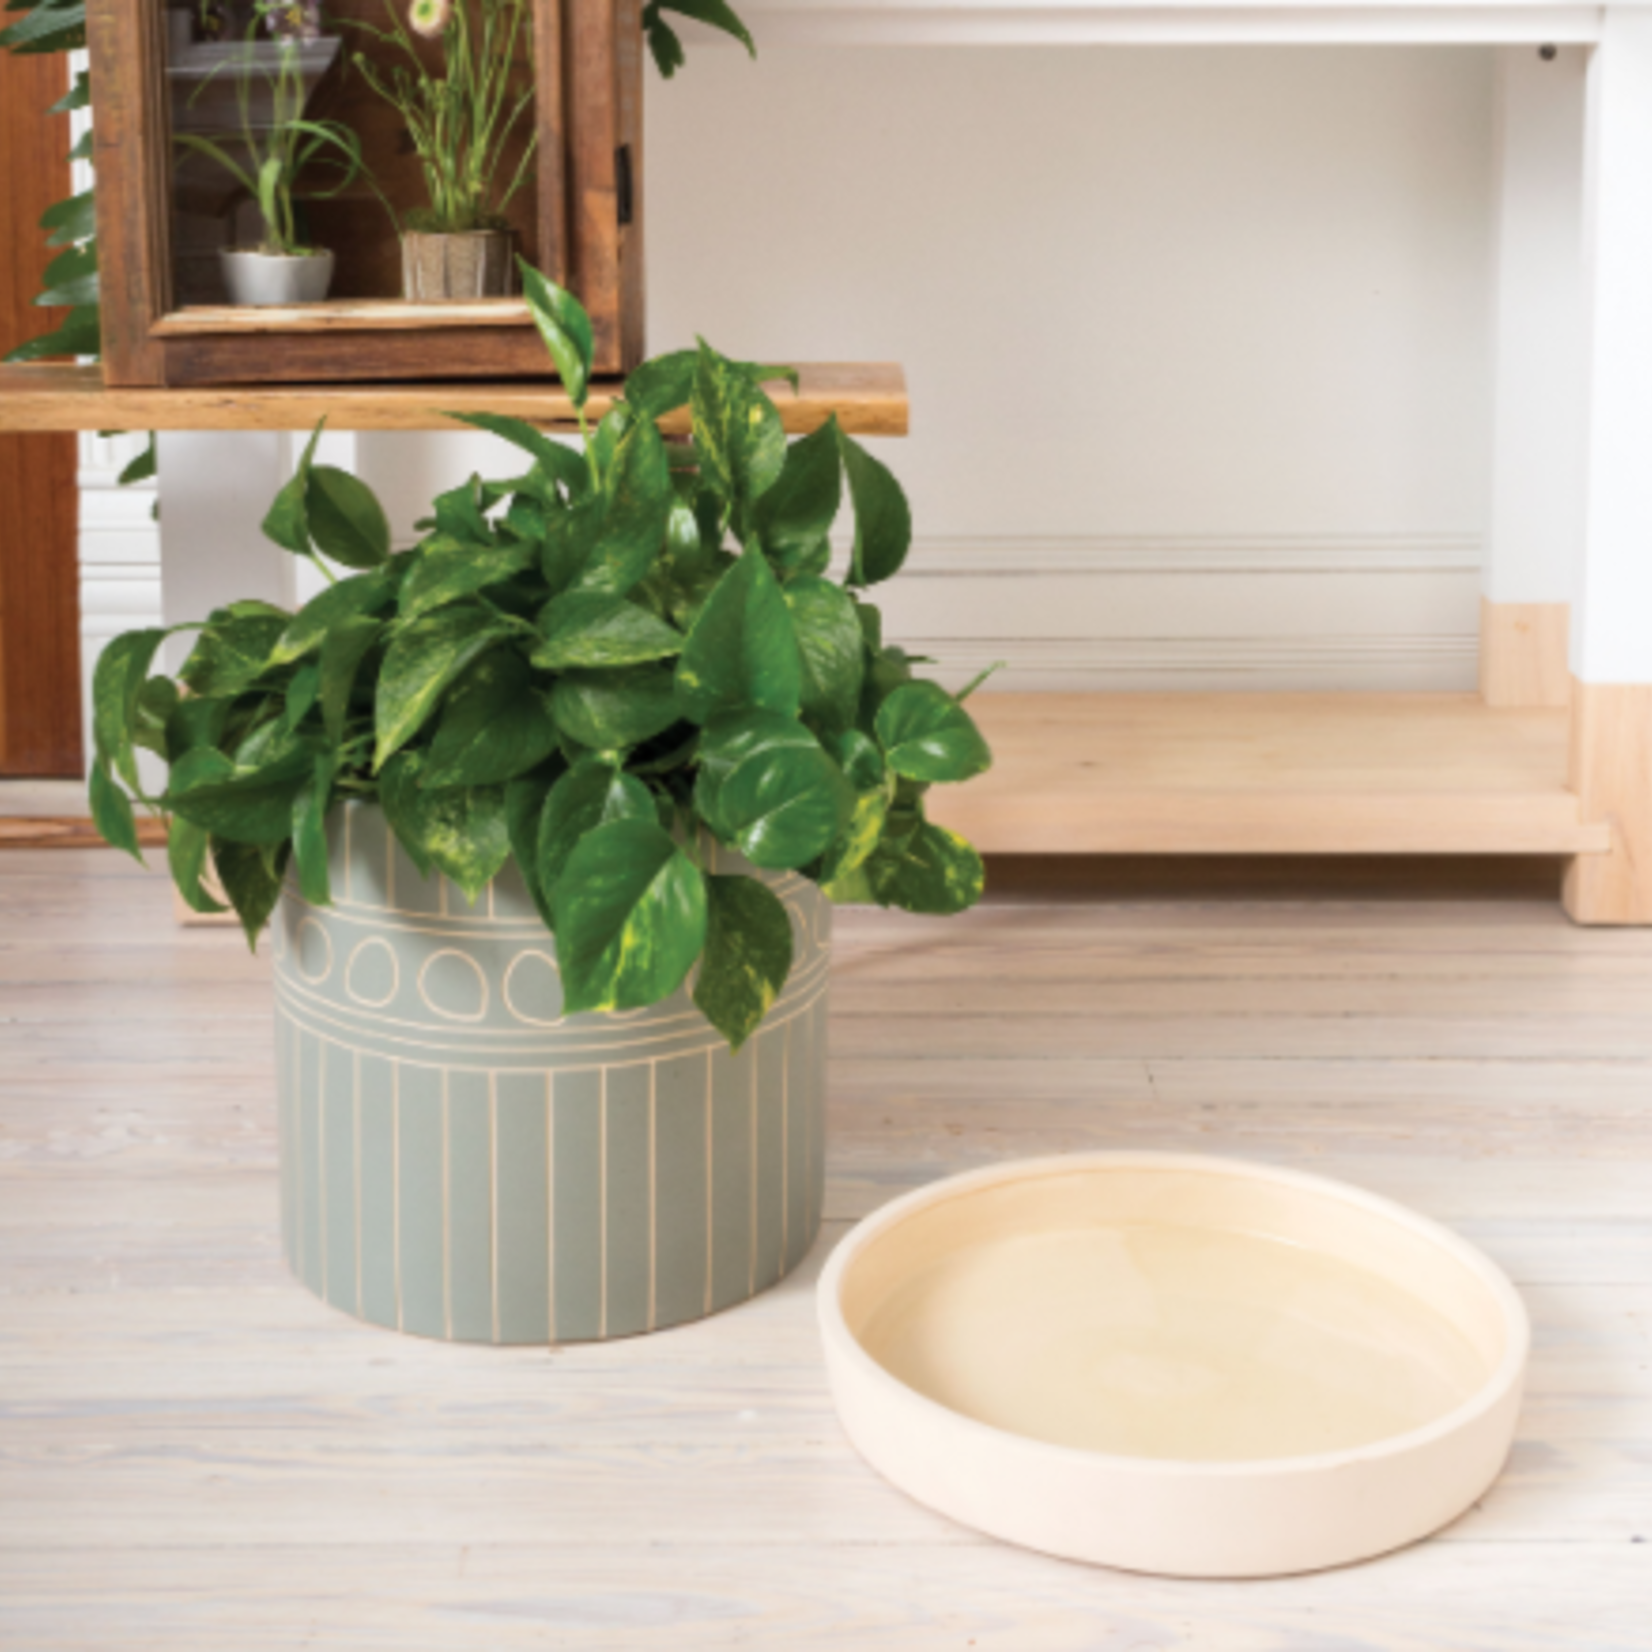 40% OFF WAS $91.49 NOW $45.75, 11.5”H X 13.5” GREEN YONA POT (AD)